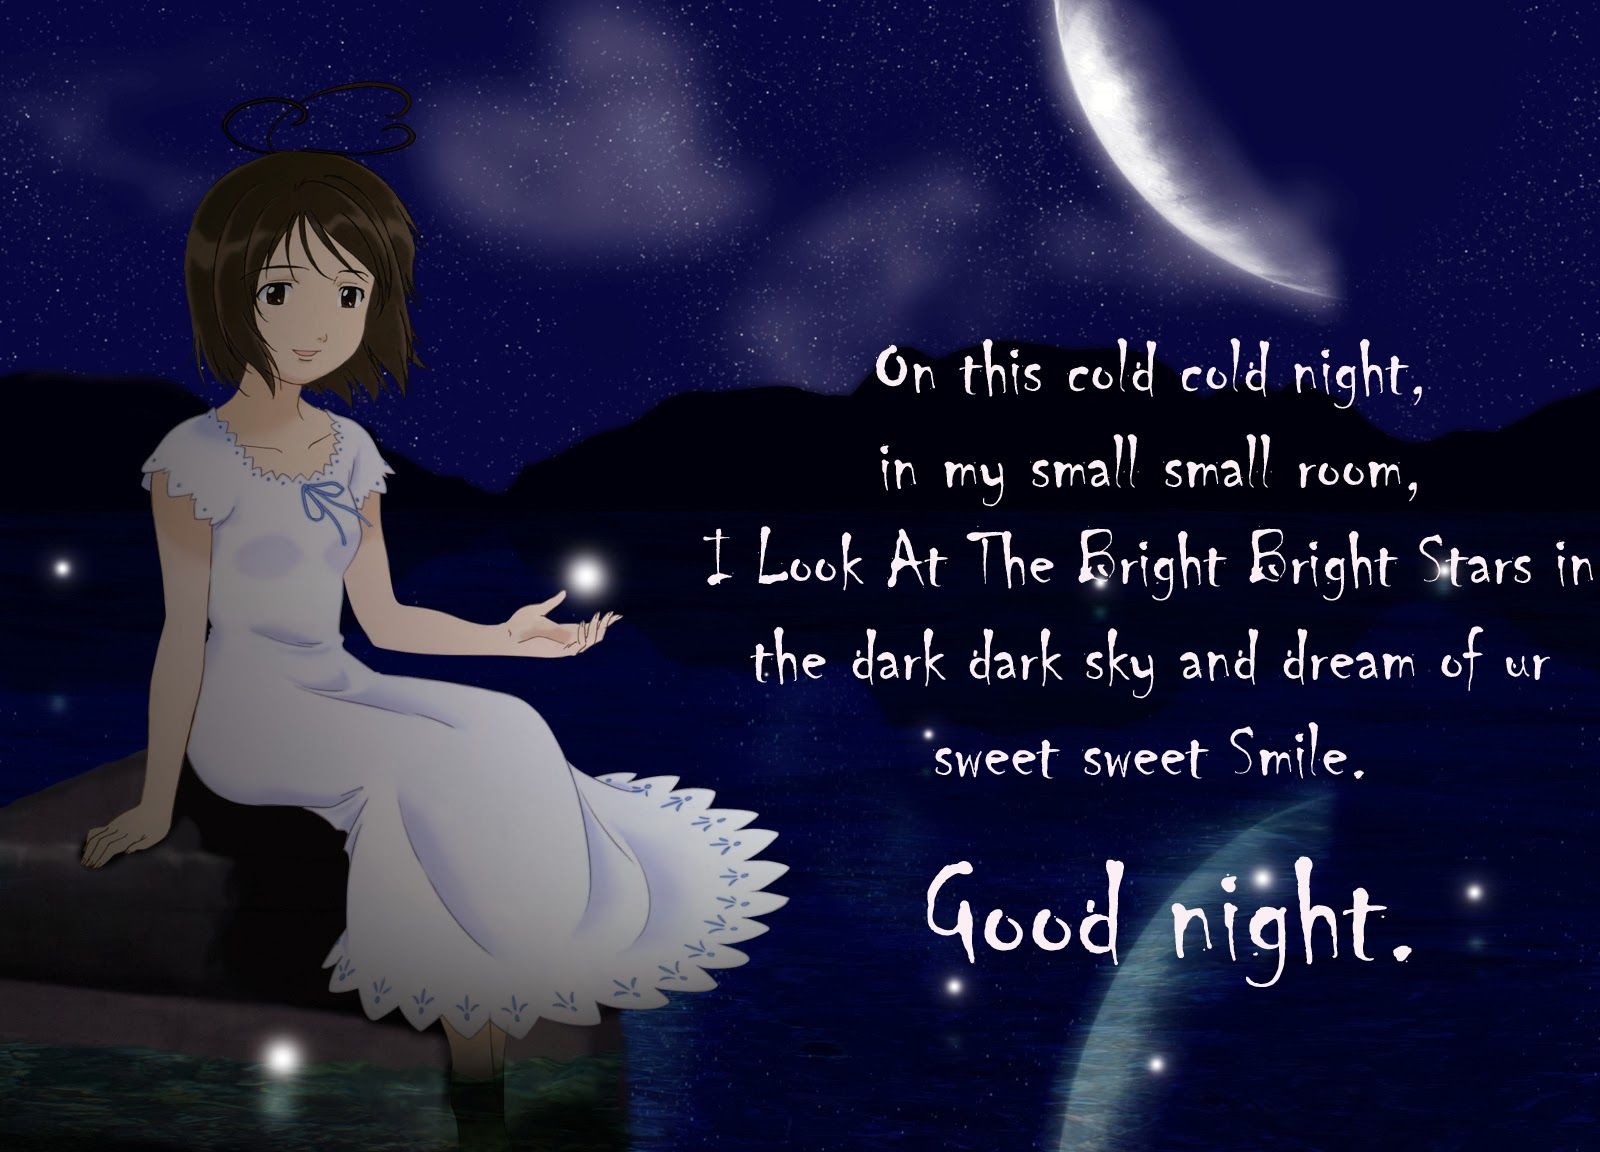 Good Night Sweet Dreams Wishes HD Wallpaper and Quotes Download Free. Romantic good night, Good night messages, Good night quotes